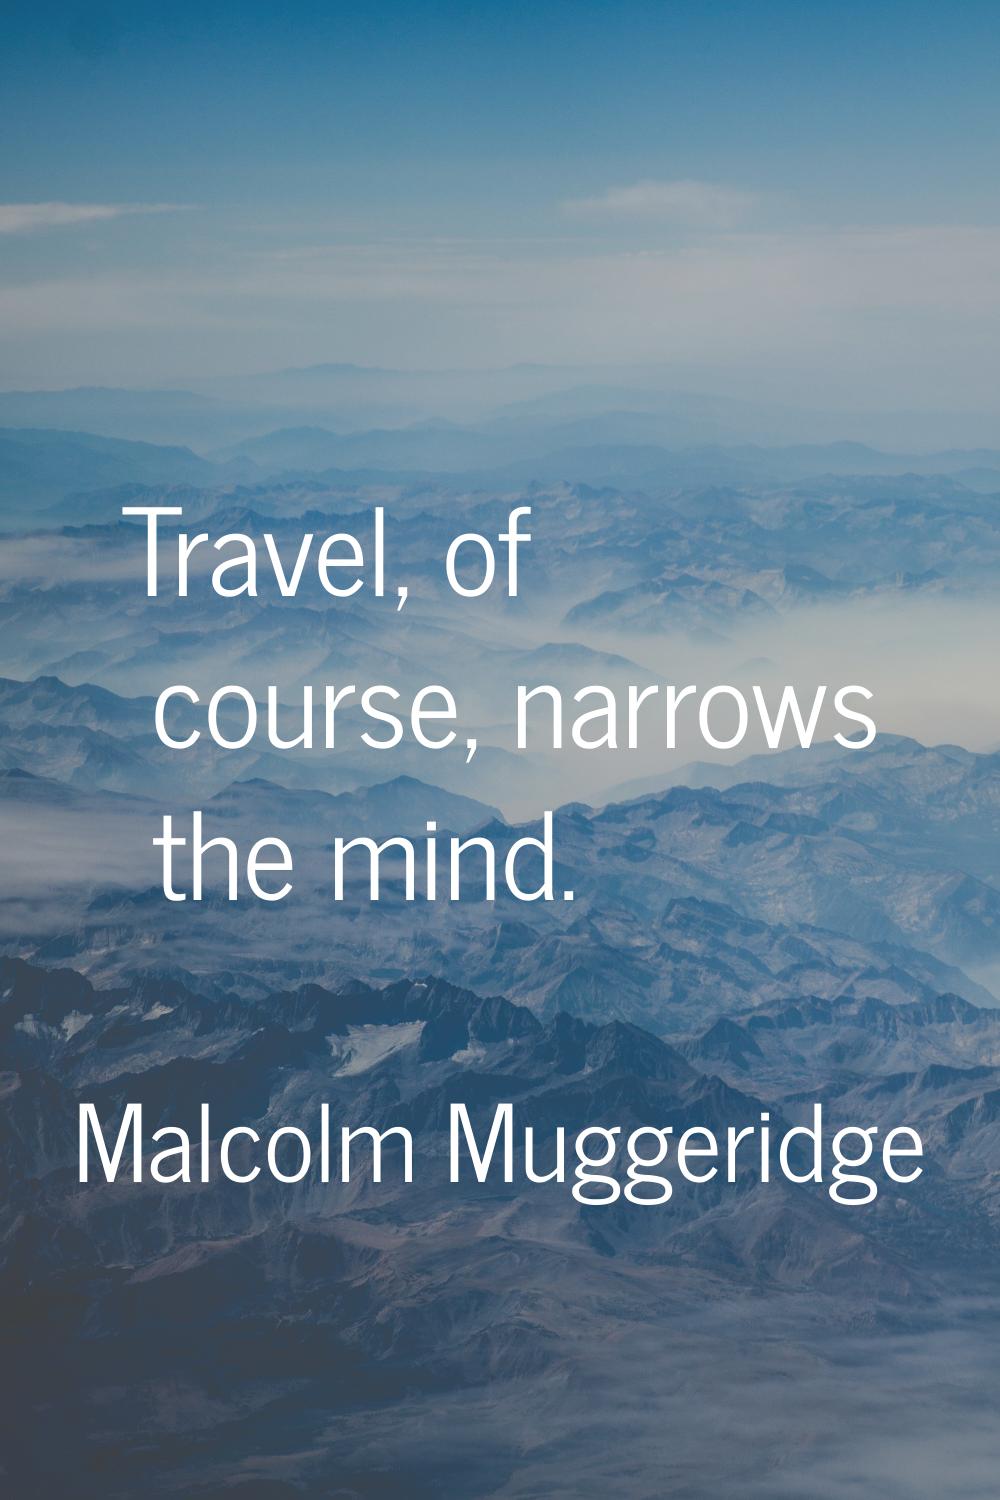 Travel, of course, narrows the mind.